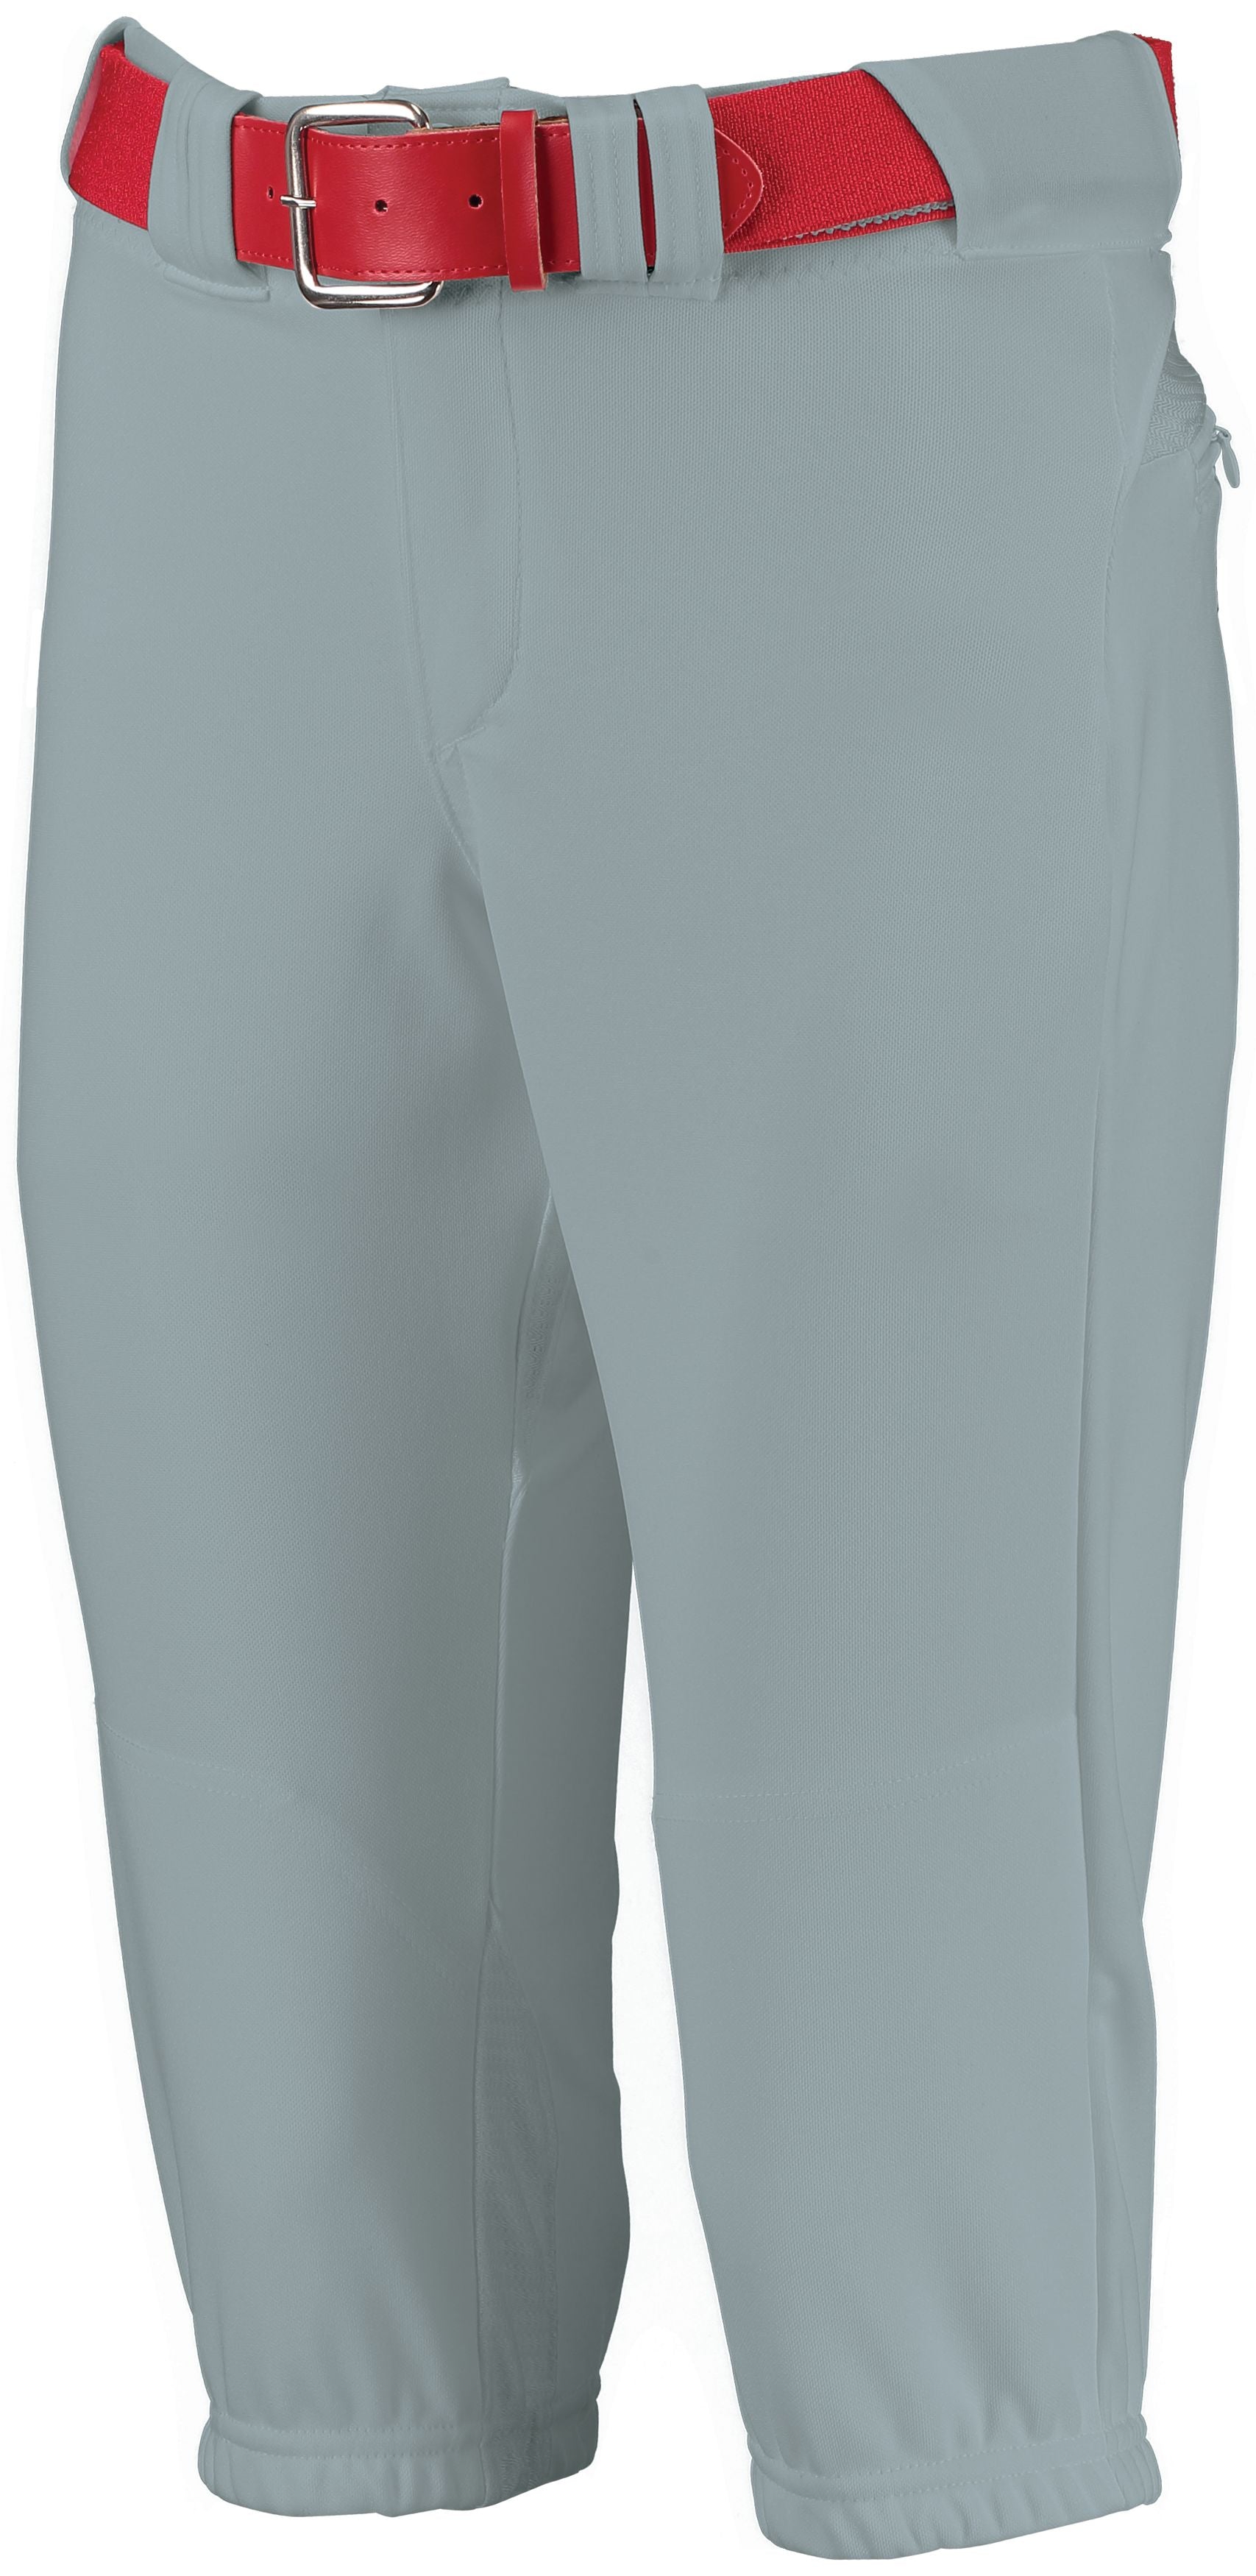 Russell Athletic Ladies Low Rise Diamond Fit Knicker in Baseball Grey  -Part of the Ladies, Softball, Russell-Athletic-Products product lines at KanaleyCreations.com